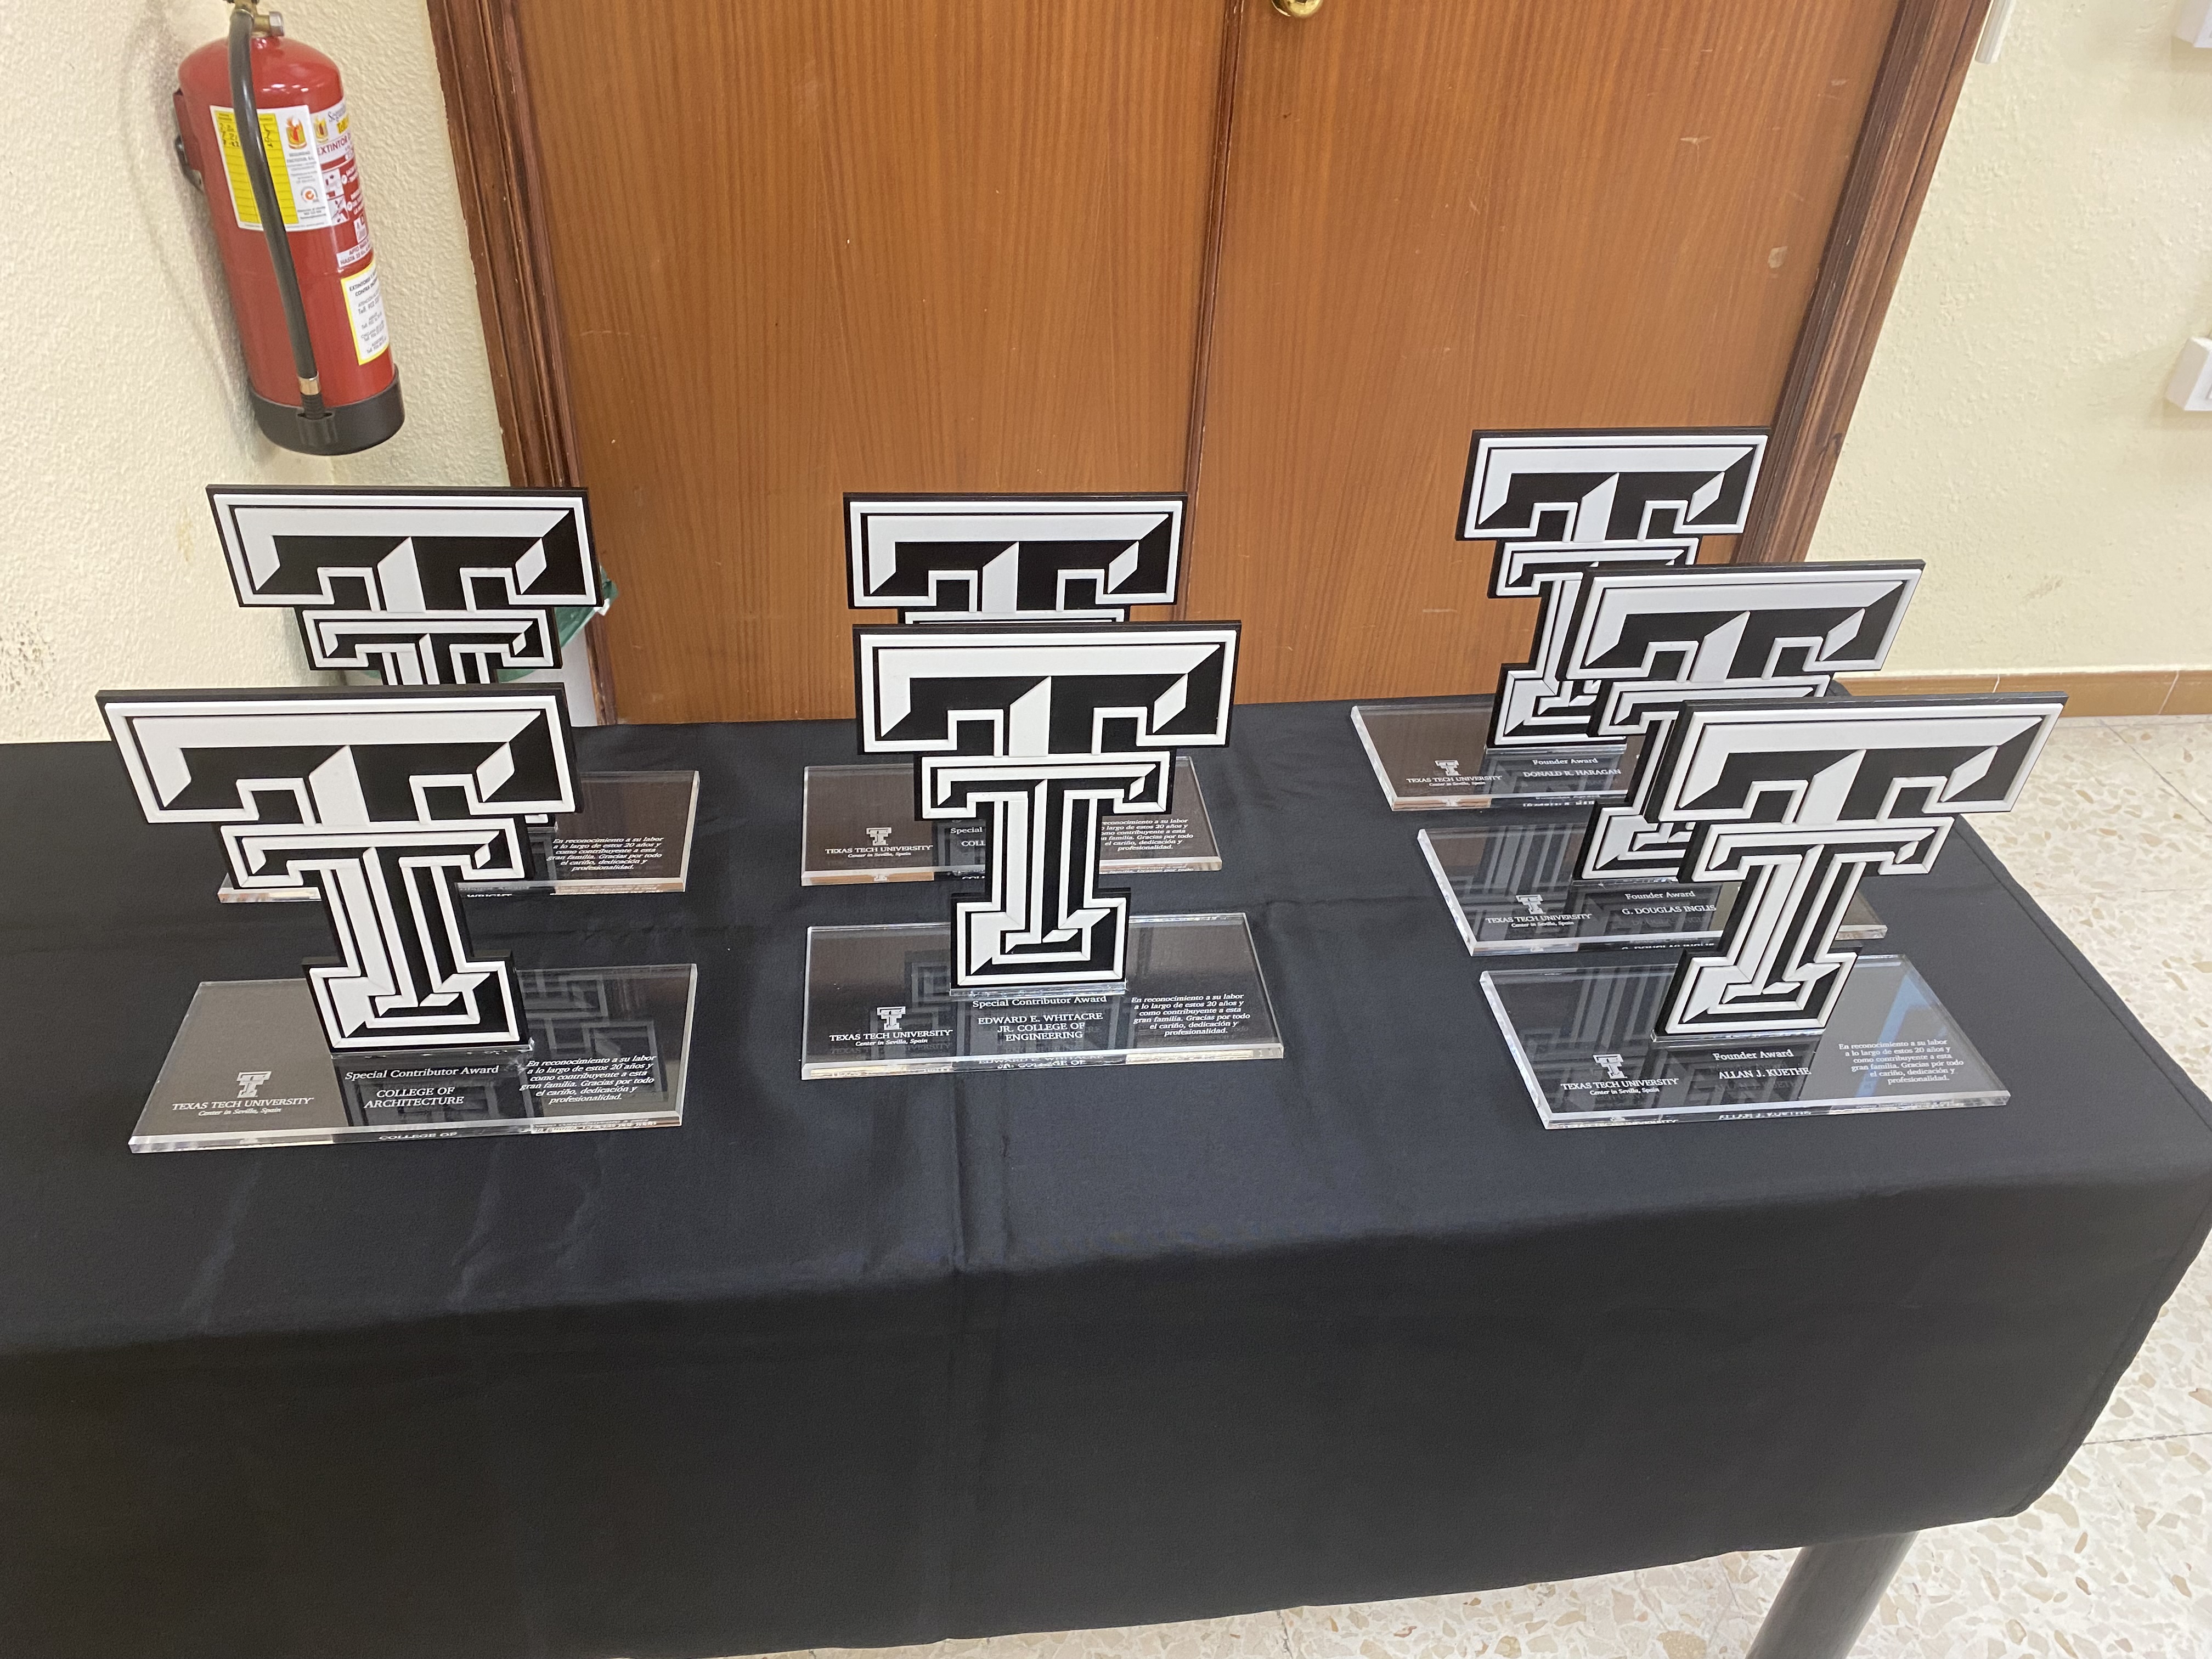 Table showing awards given at alumni ceremony